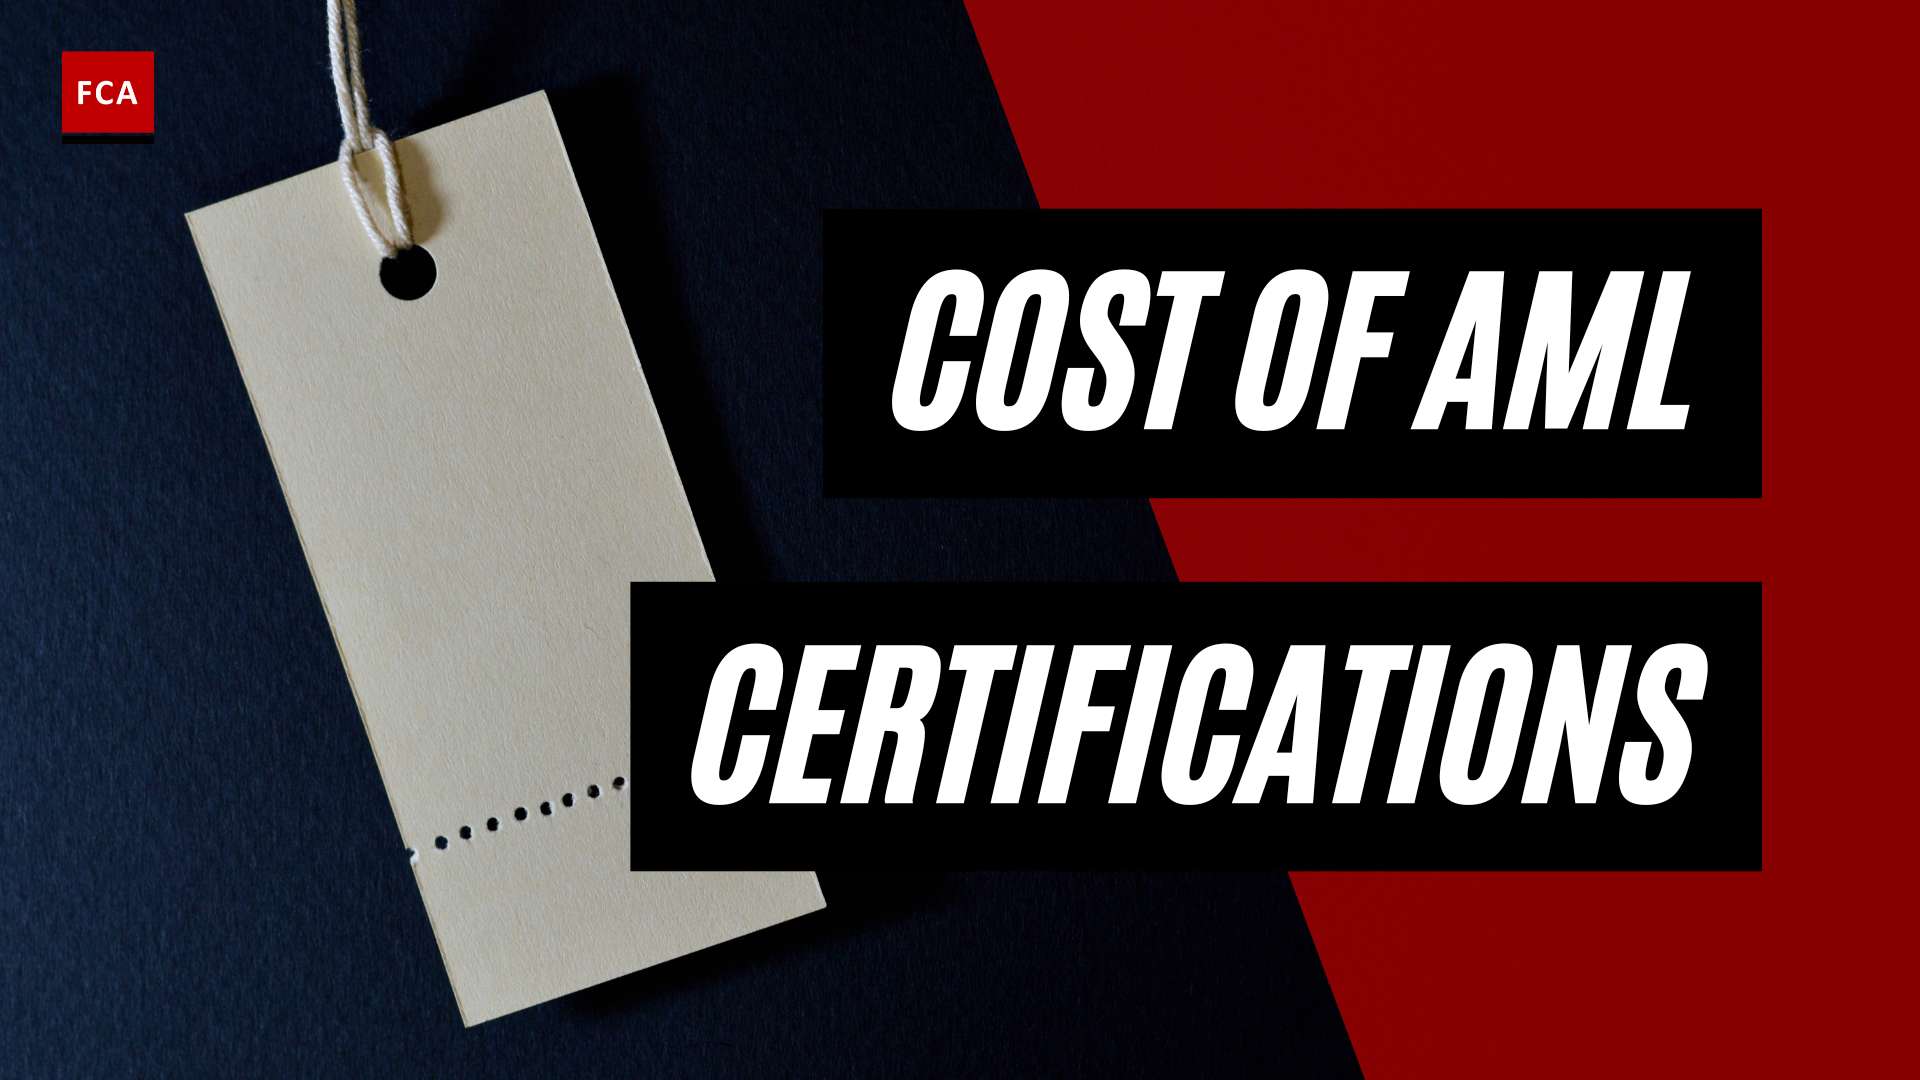 Navigating Aml Certification: Whats The True Cost?